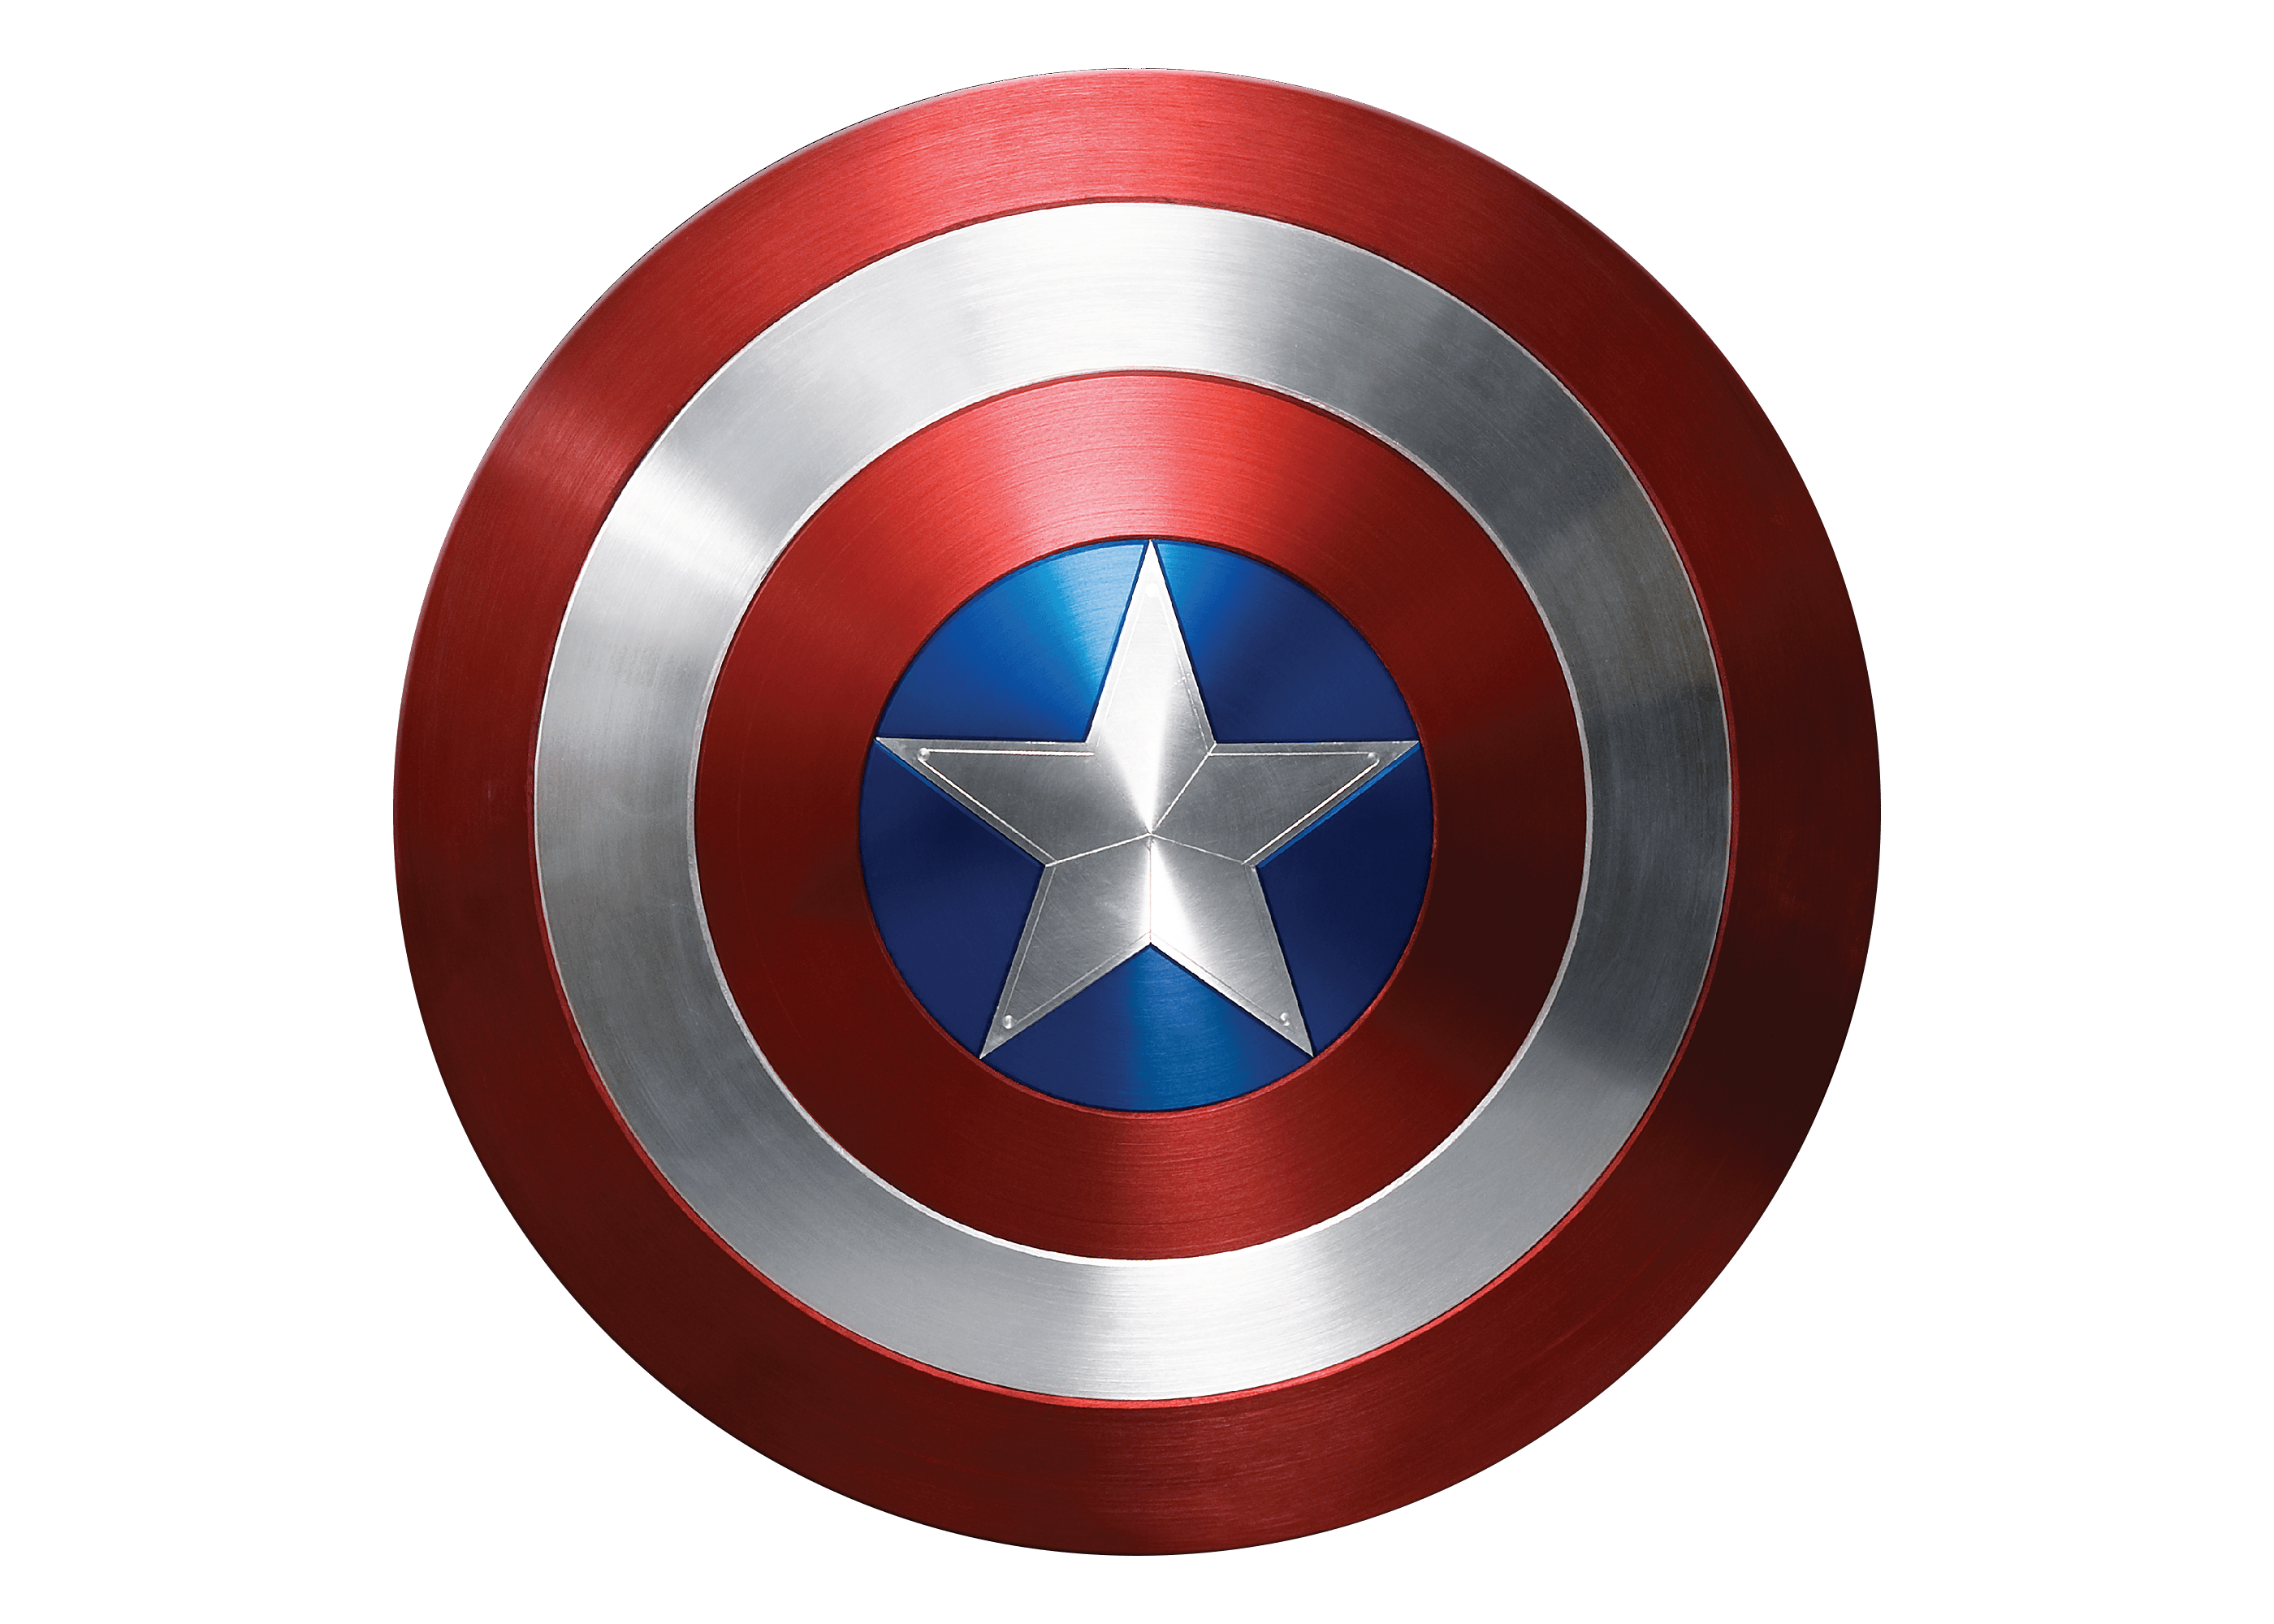 Captain America Logo - Captain America Logo, Captain America Symbol, Meaning, History and ...